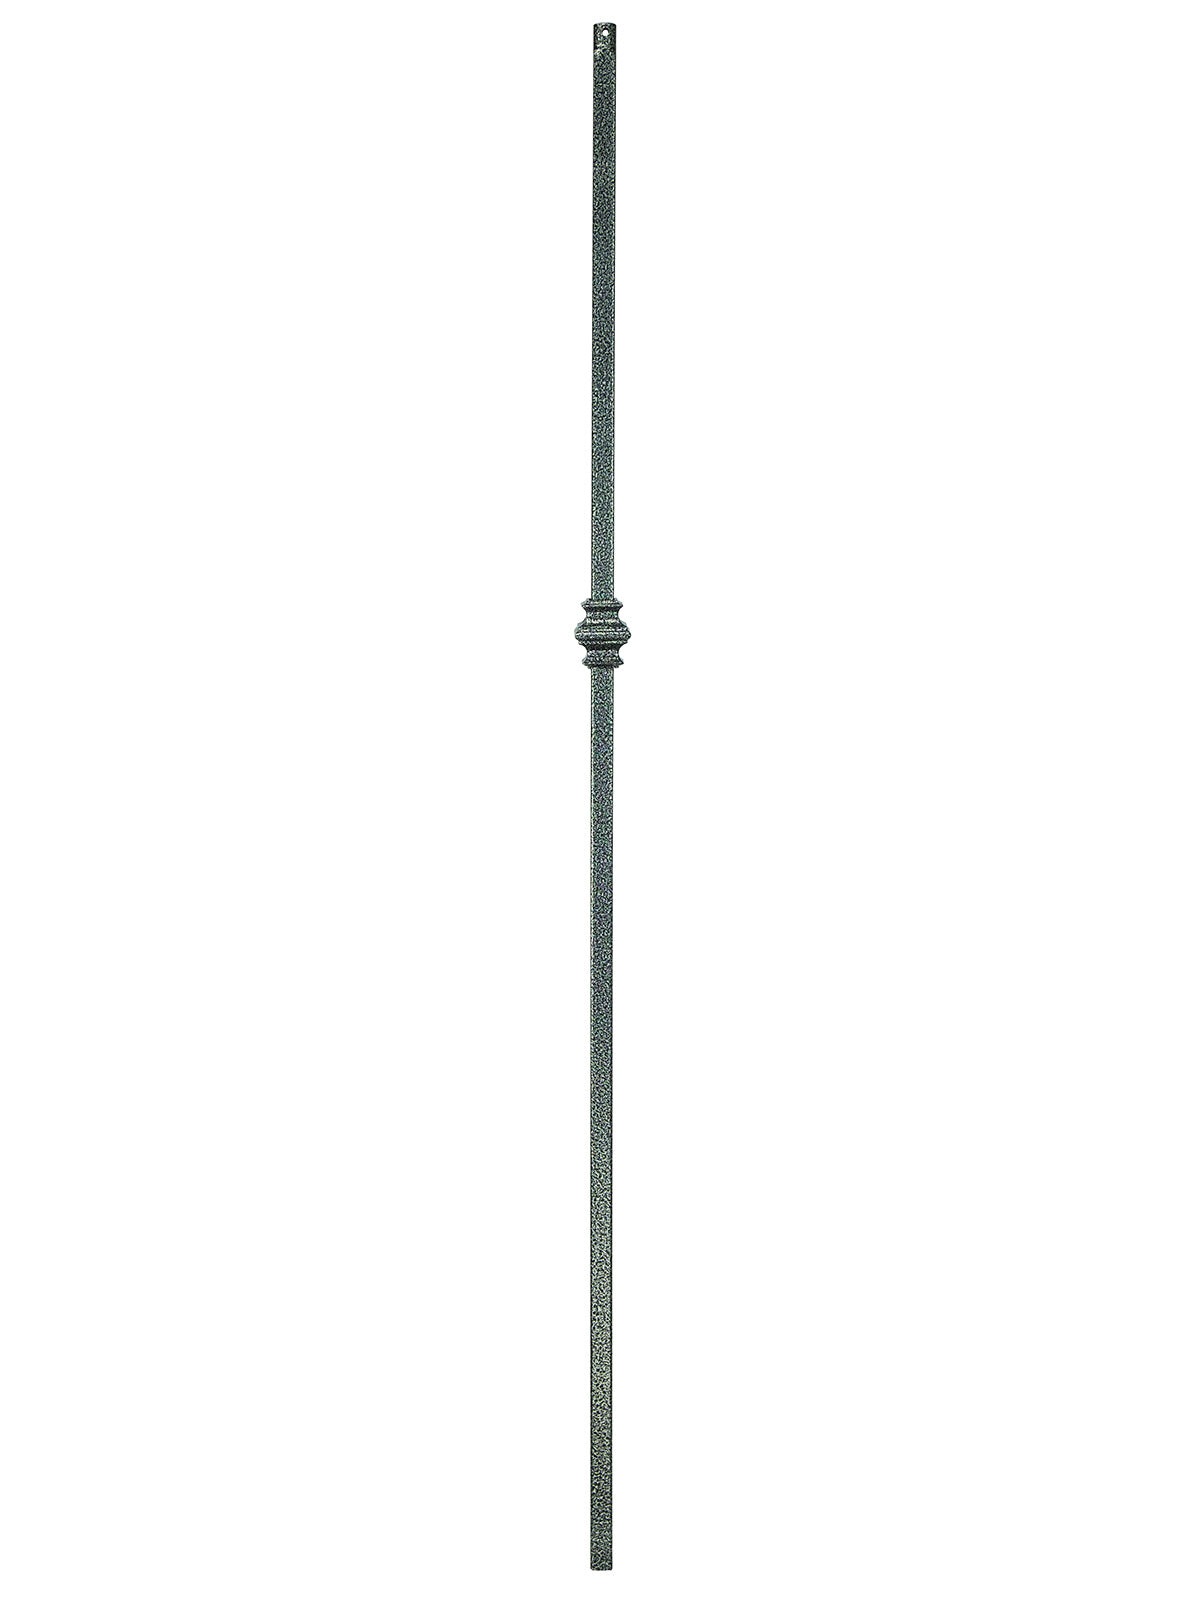 Iron Baluster 2G60 - 5/8" Square - Single Knuckle